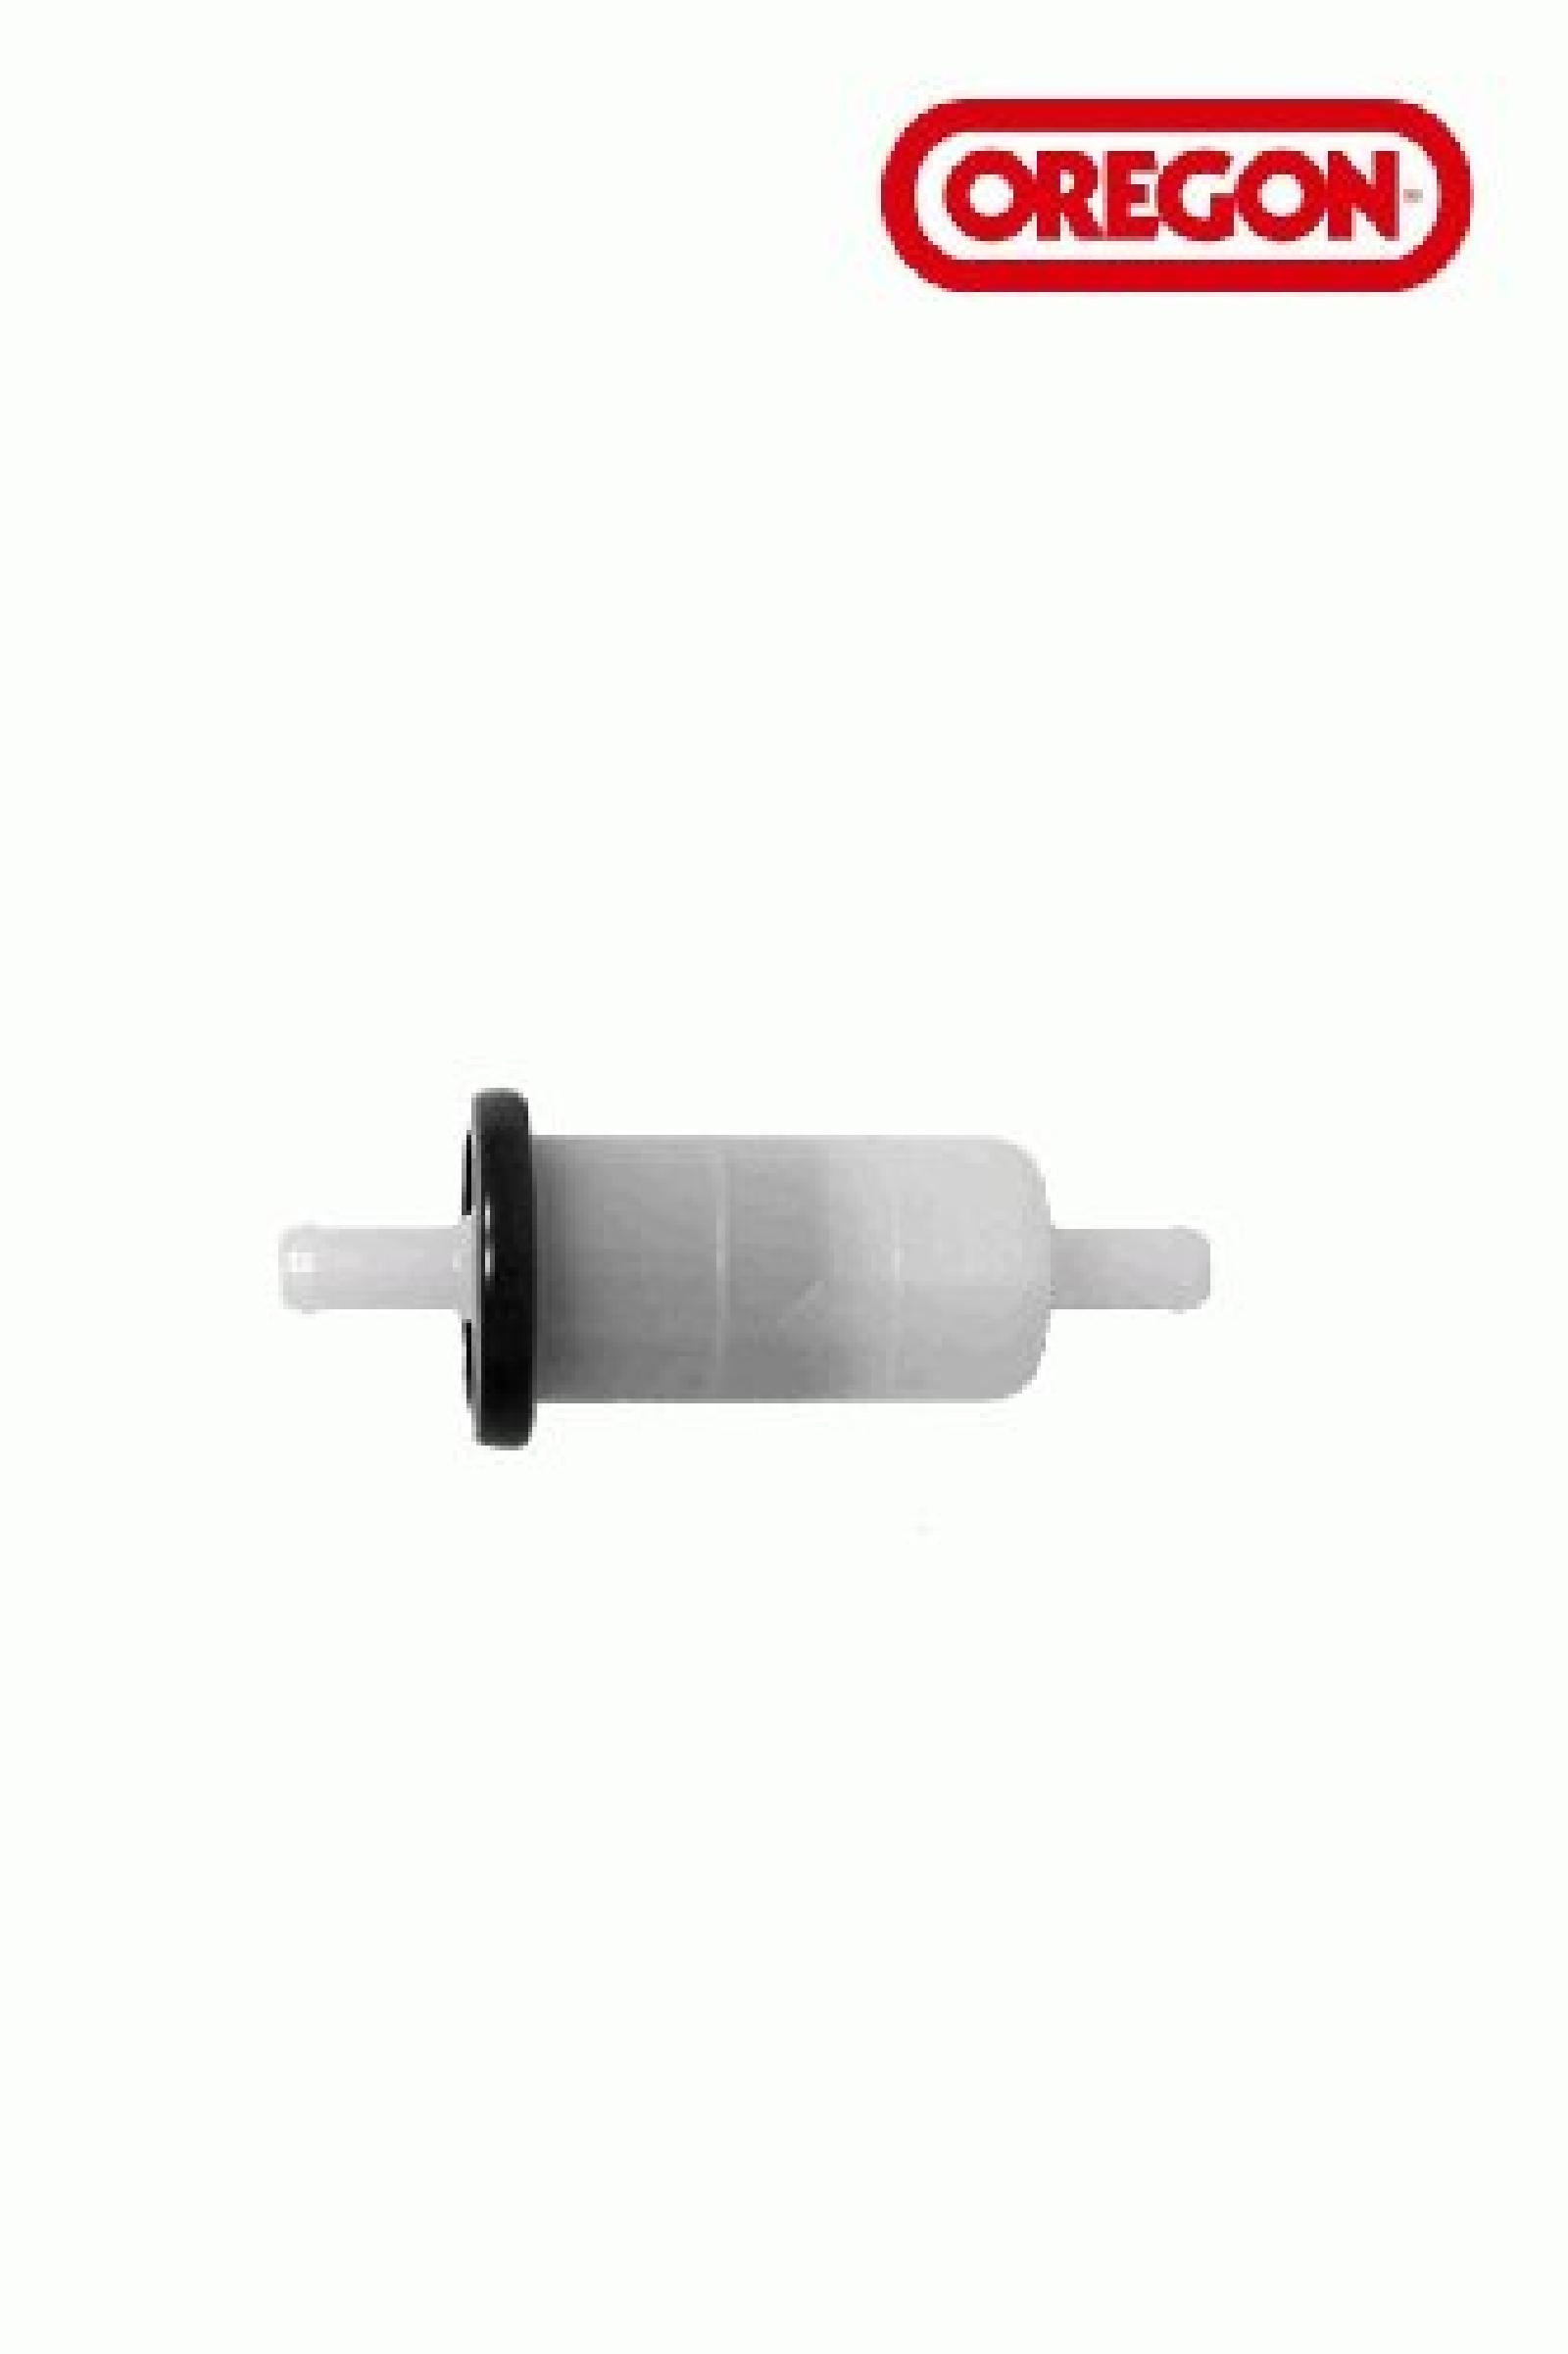 FUEL FILTER IN LINE KAWAS part# 07-062 by Oregon